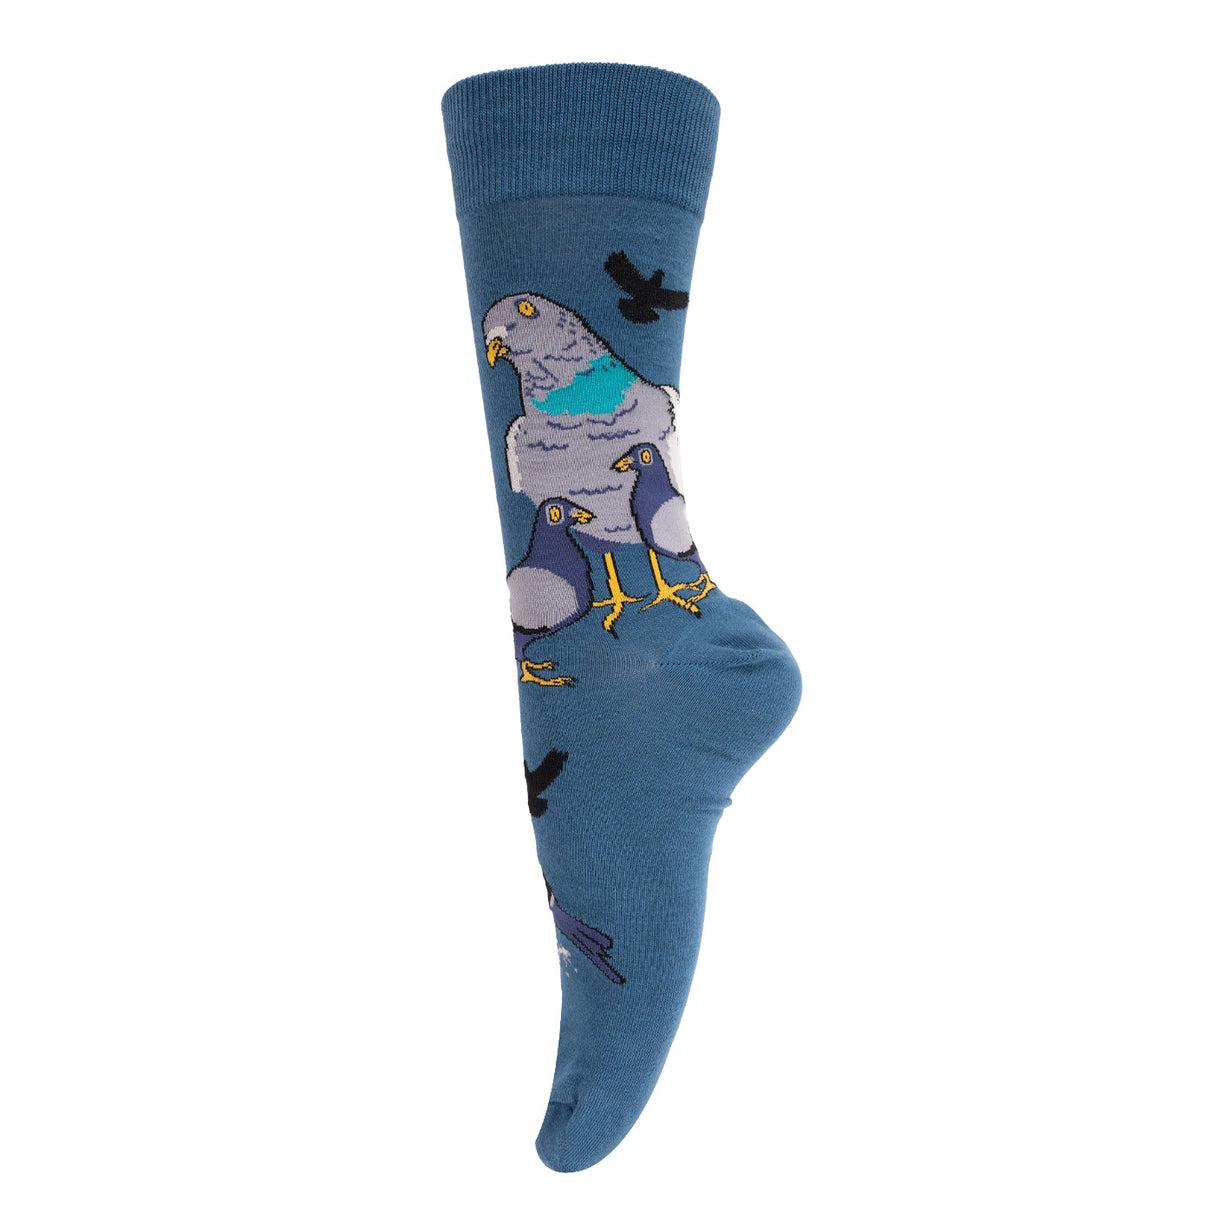 Chaussettes mi-mollet So Fly, So Cool de Sock It To Me - Hommes